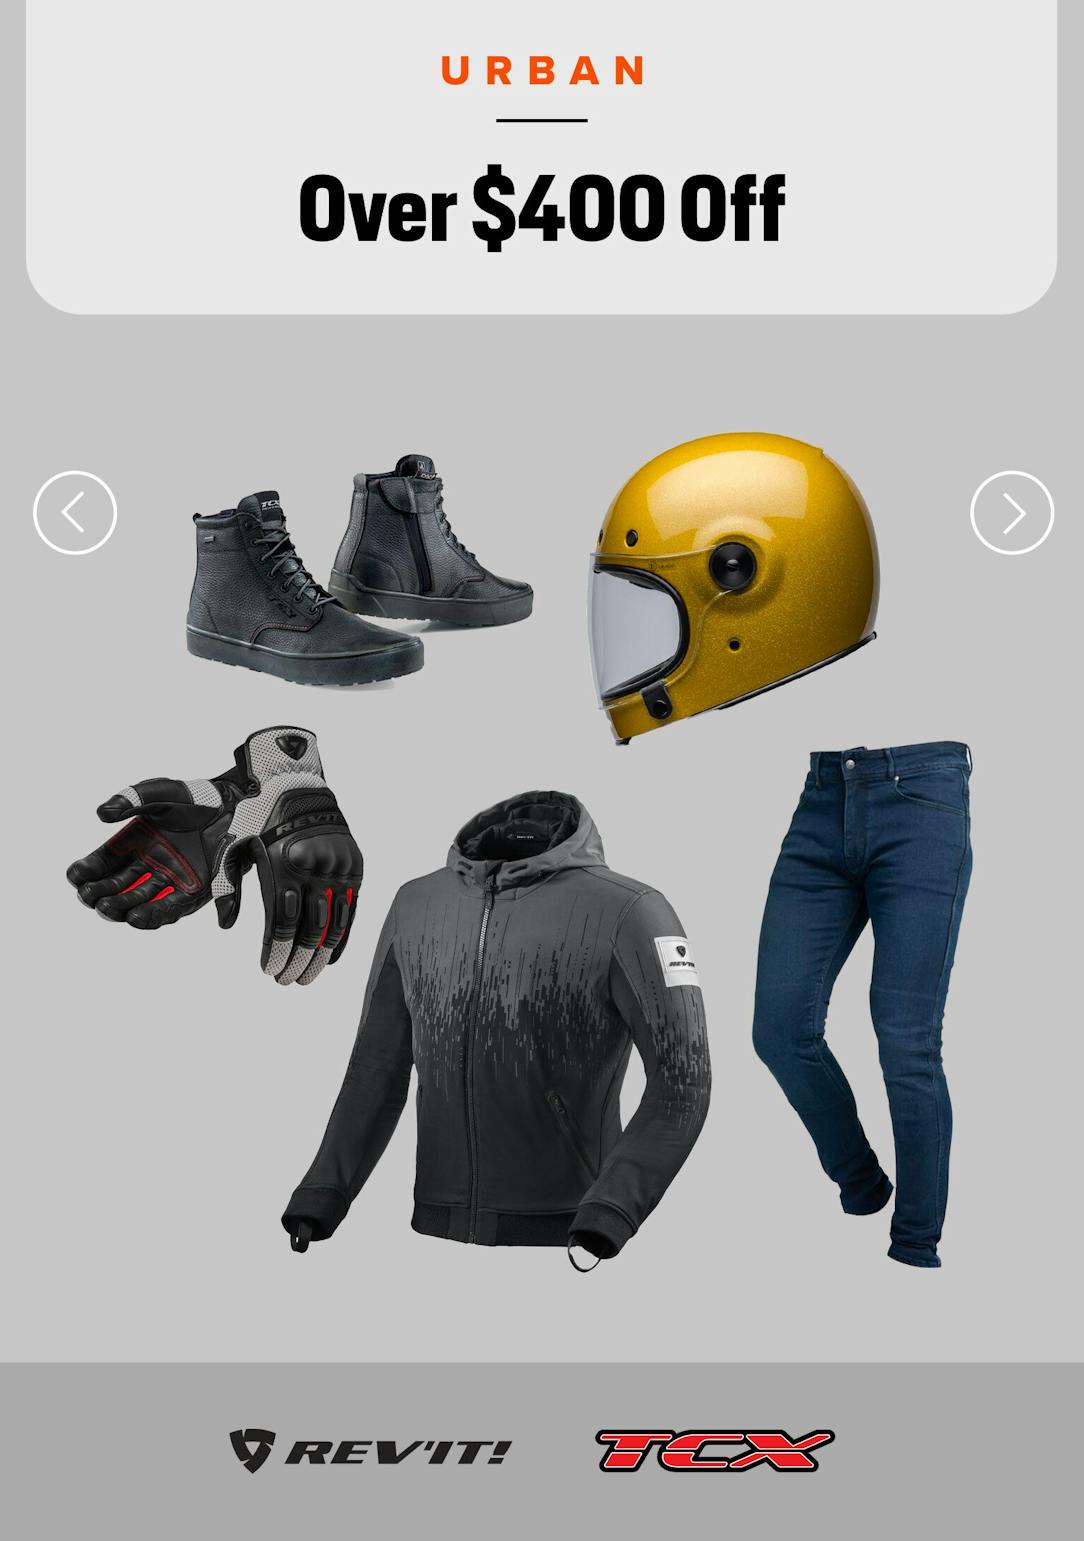 TOP CASES - Moto Market - Online Store for Rider and Motorcycle